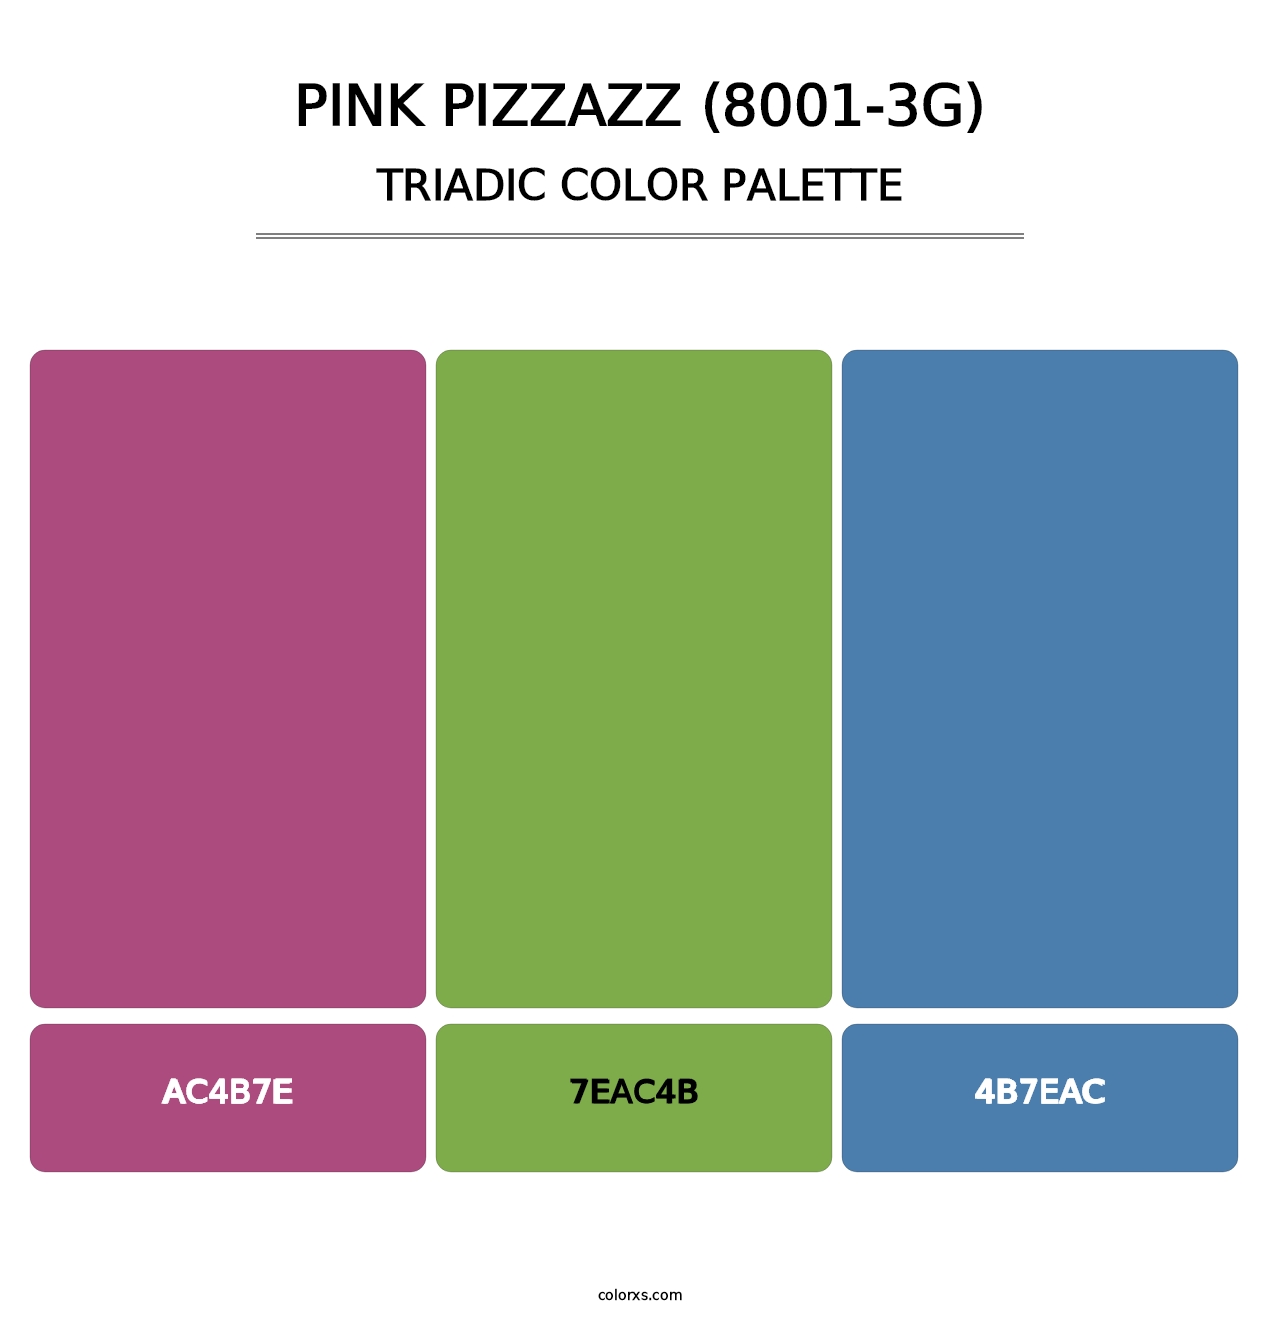 Pink Pizzazz (8001-3G) - Triadic Color Palette